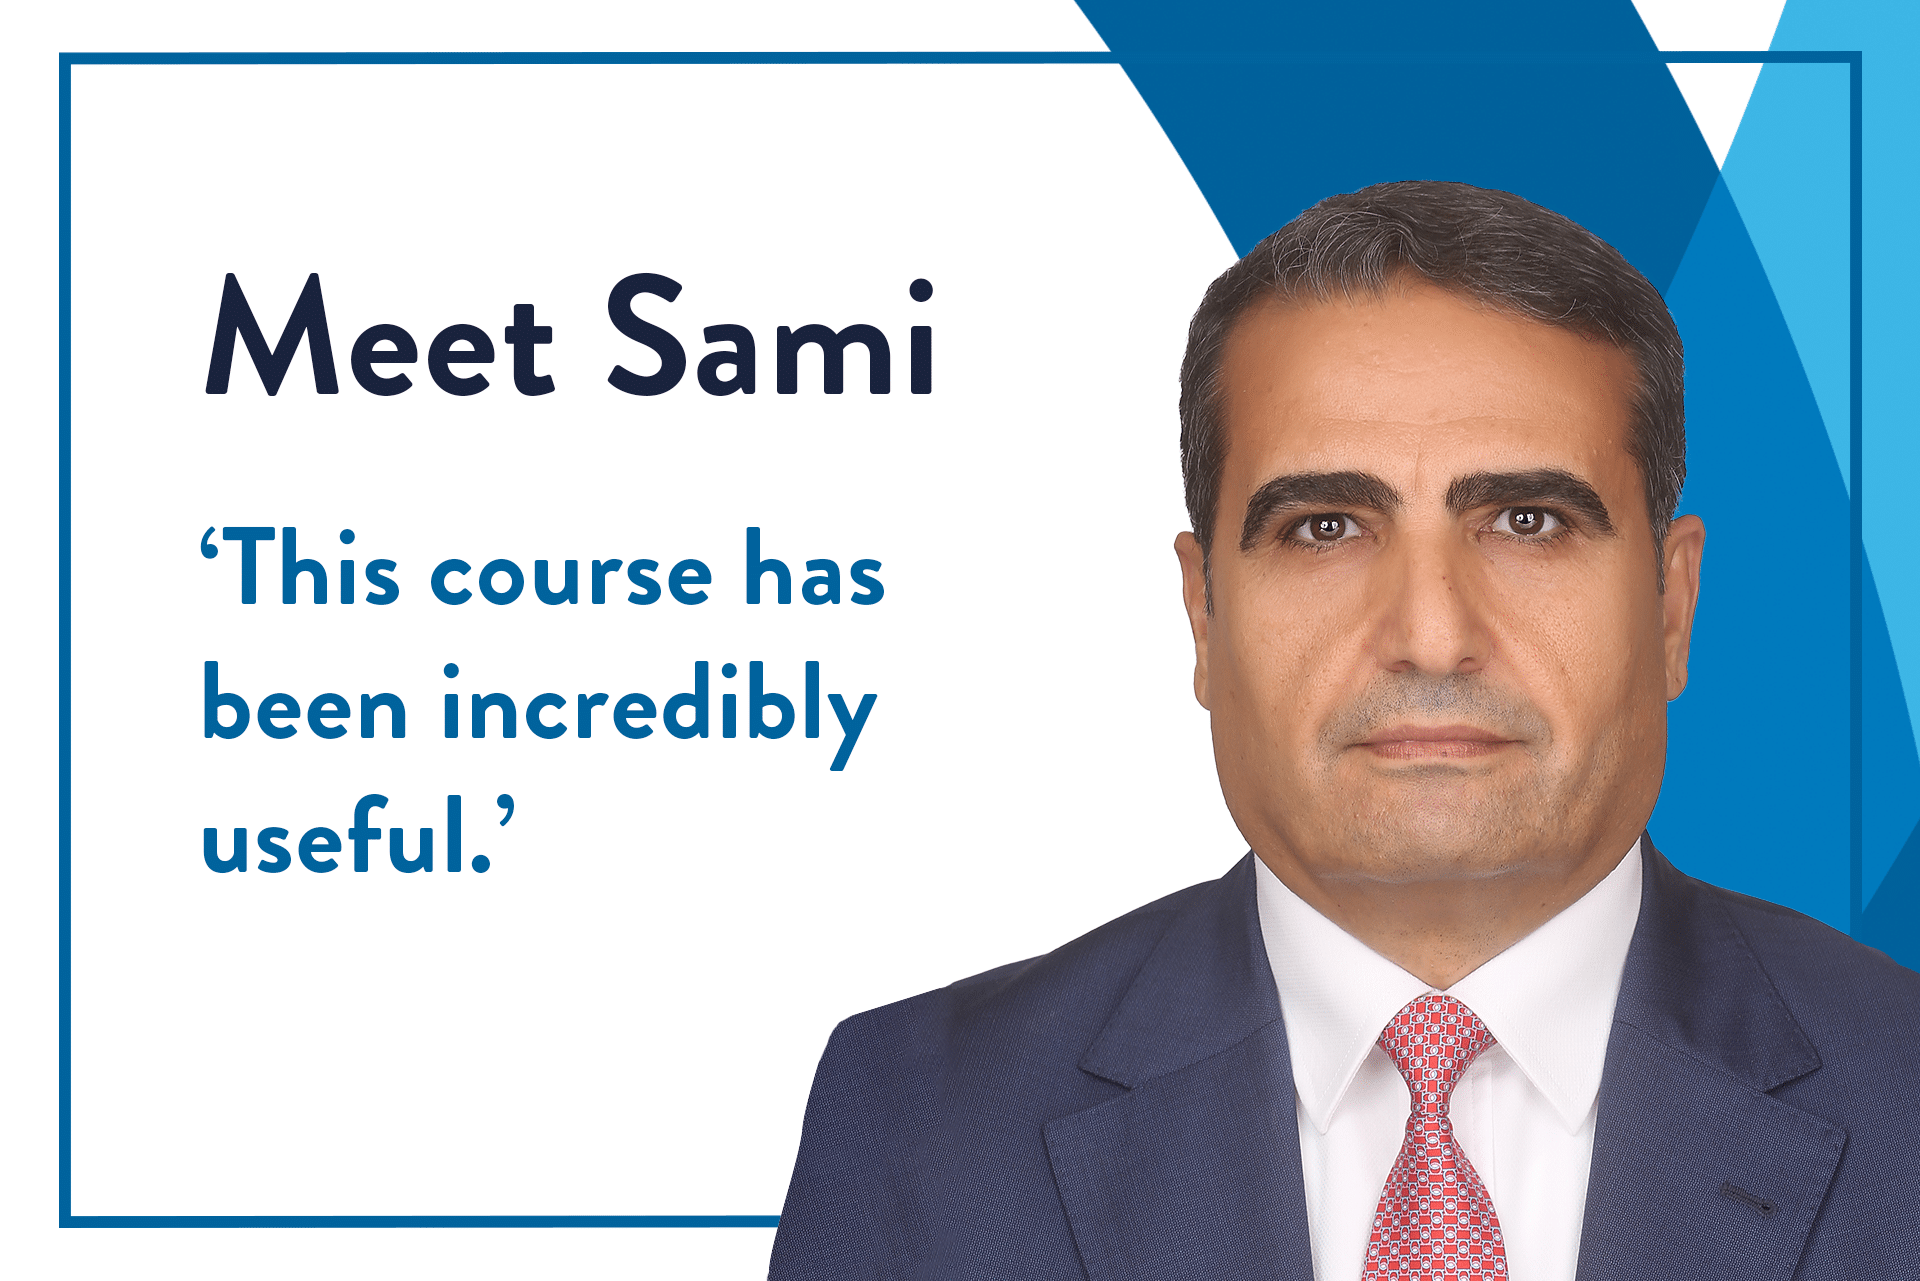 Photo of Oxford University Cyber Security for Public Leadership online short course student, Sami Almaddan, with the text "Meet Sami" and the quote "This course has been incredibly useful."